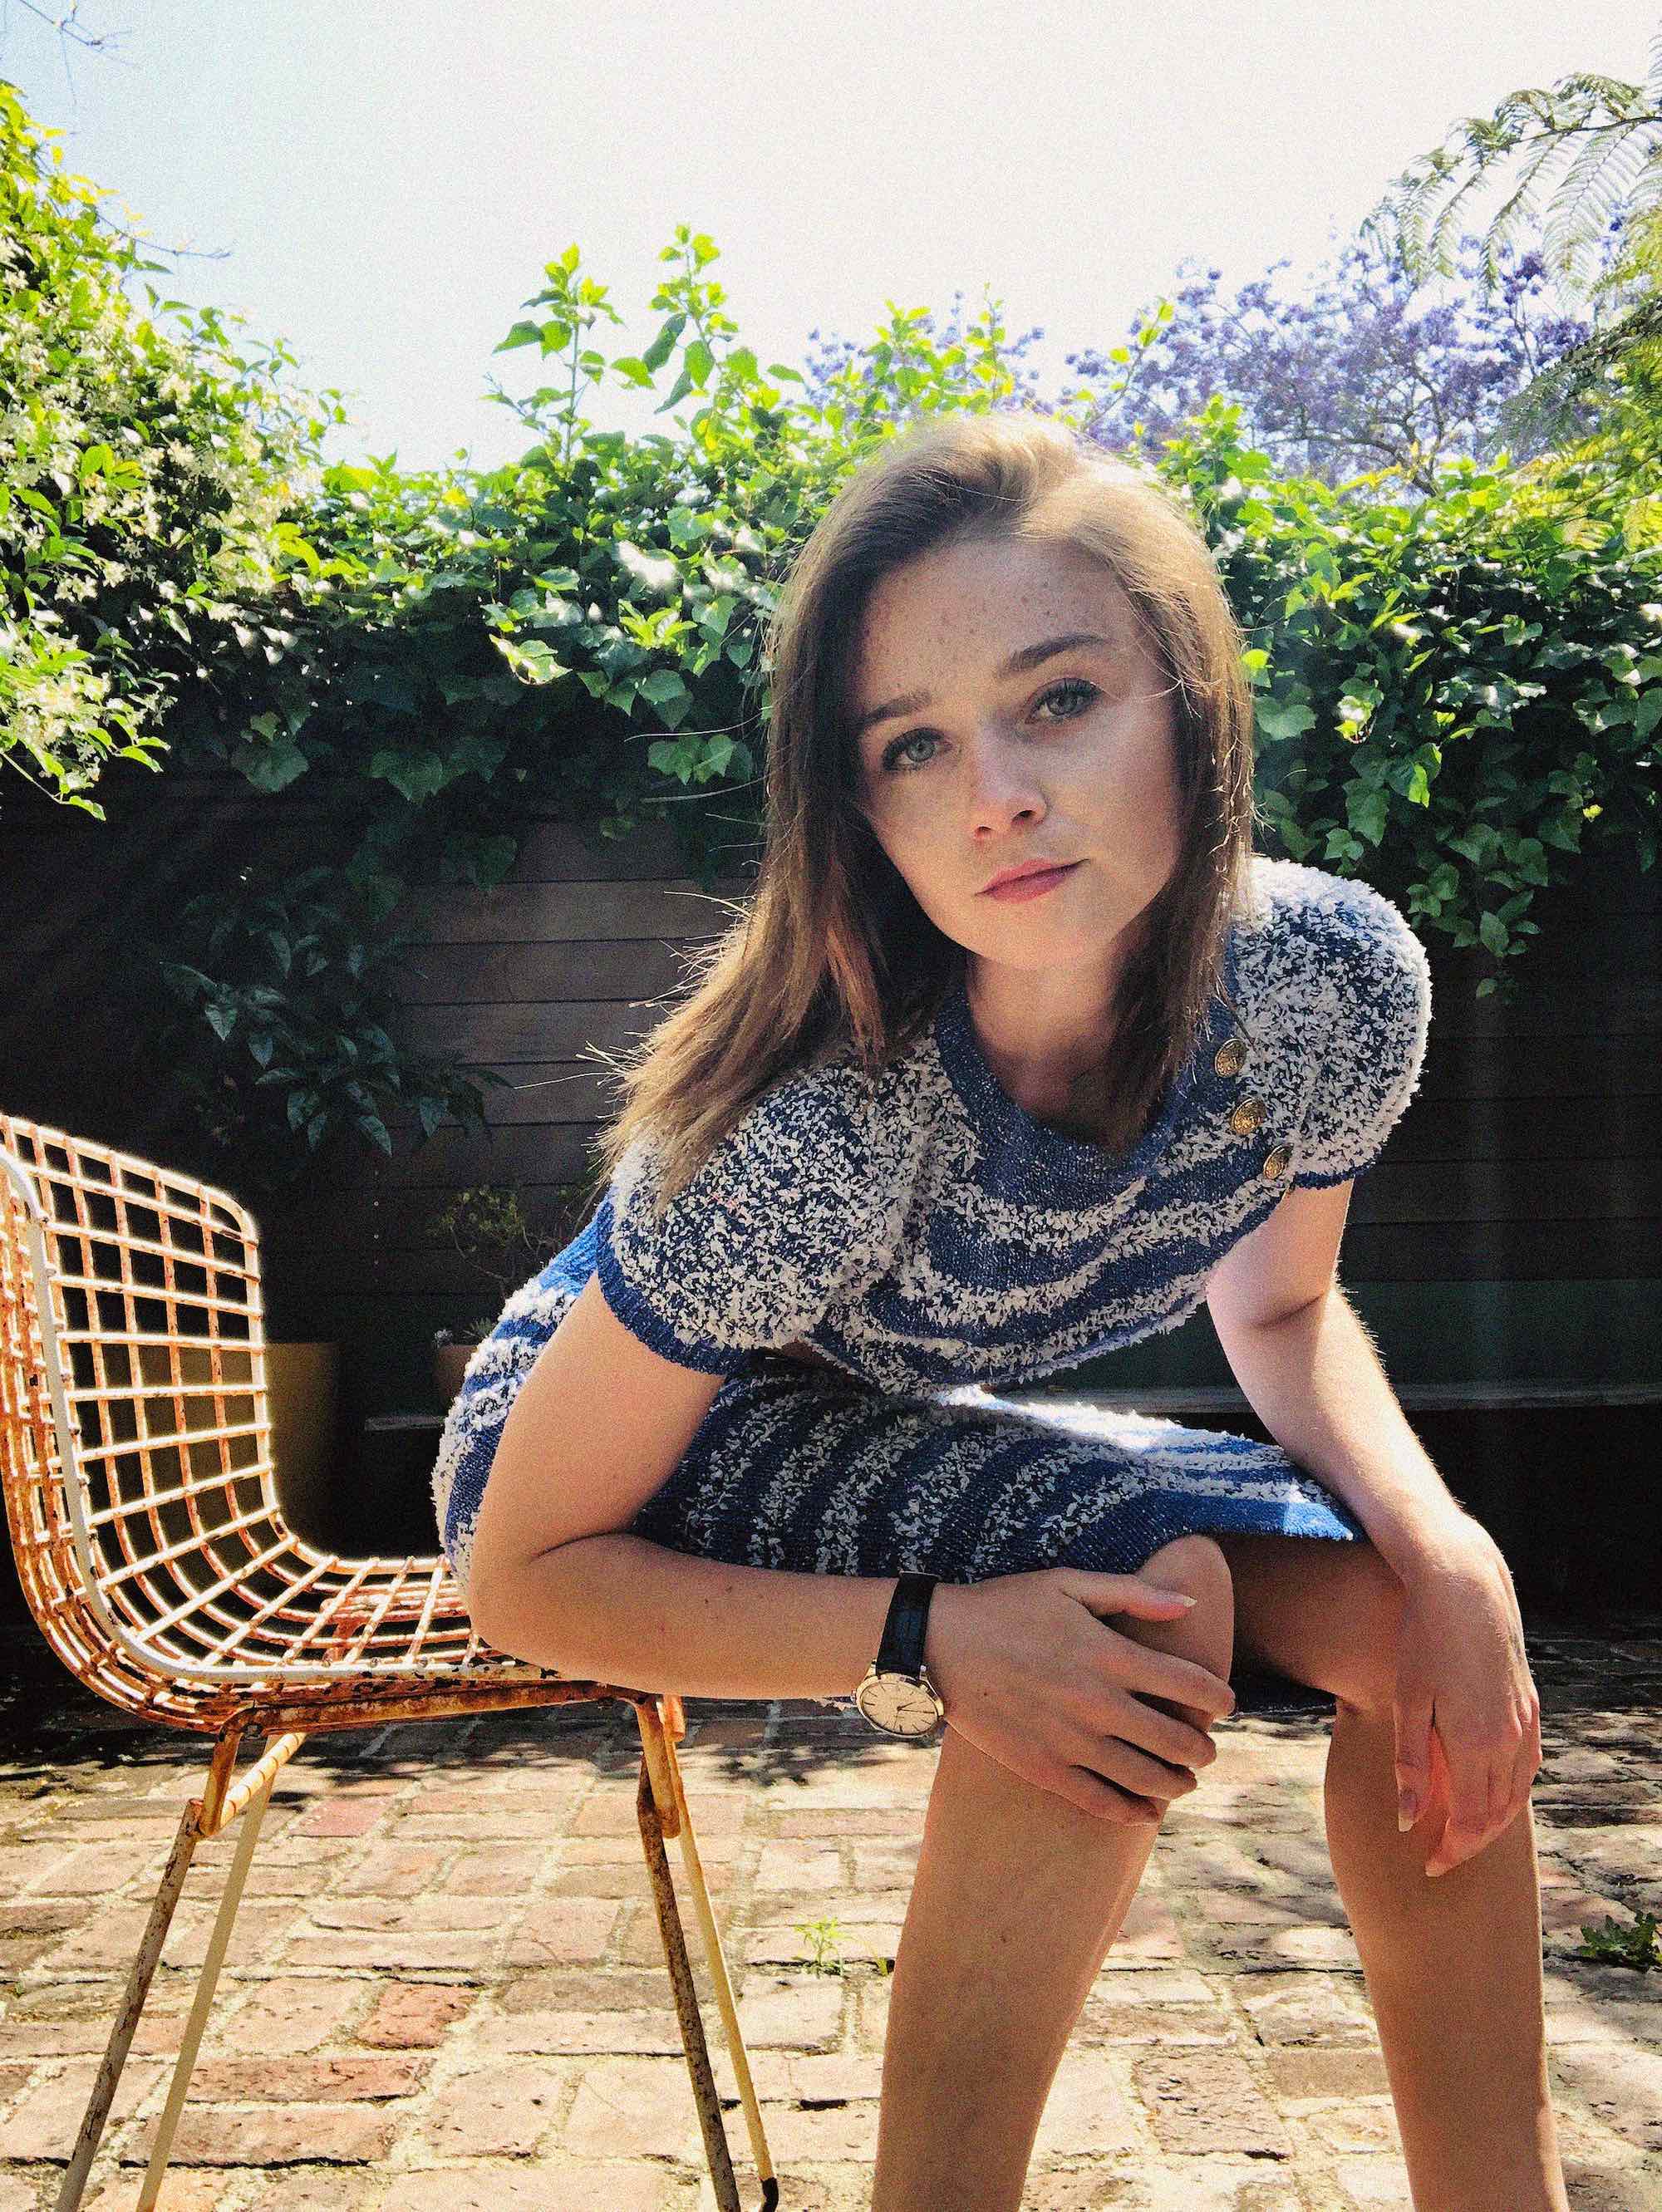 aaron monis recommends jessica barden feet pic